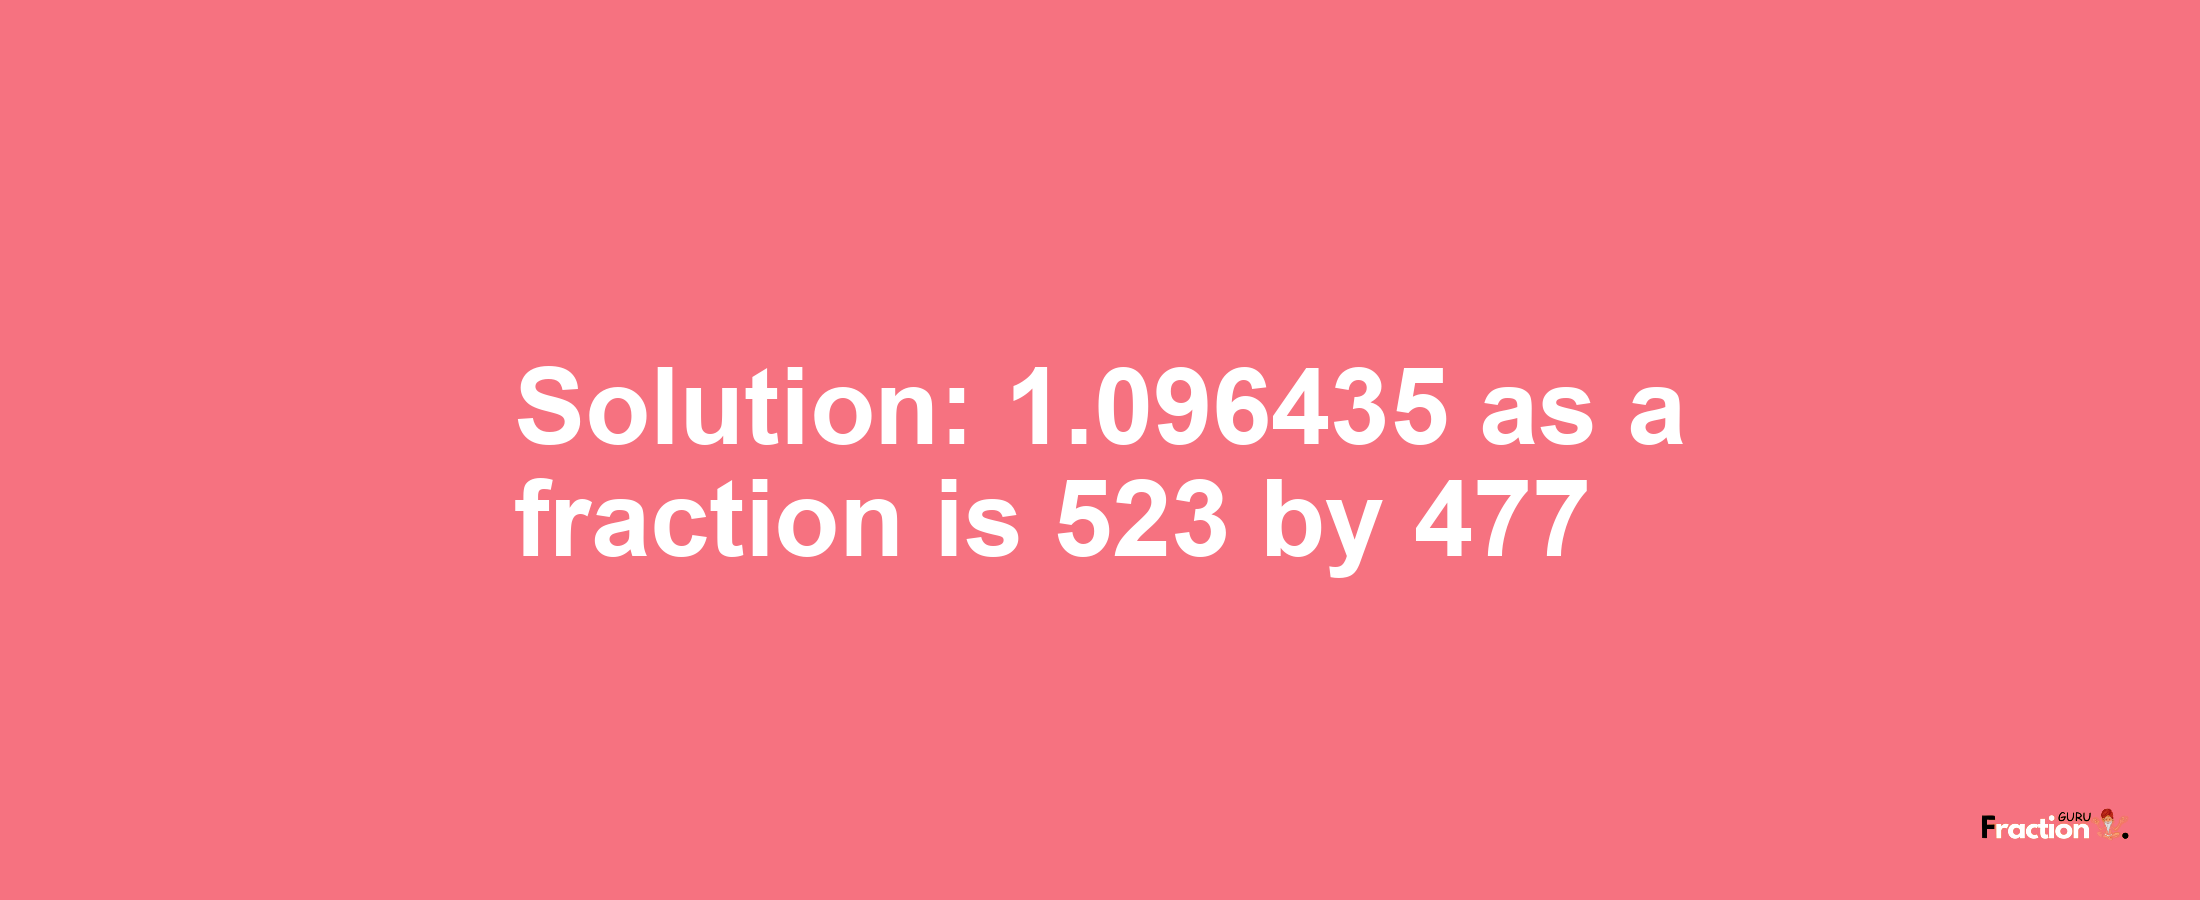 Solution:1.096435 as a fraction is 523/477